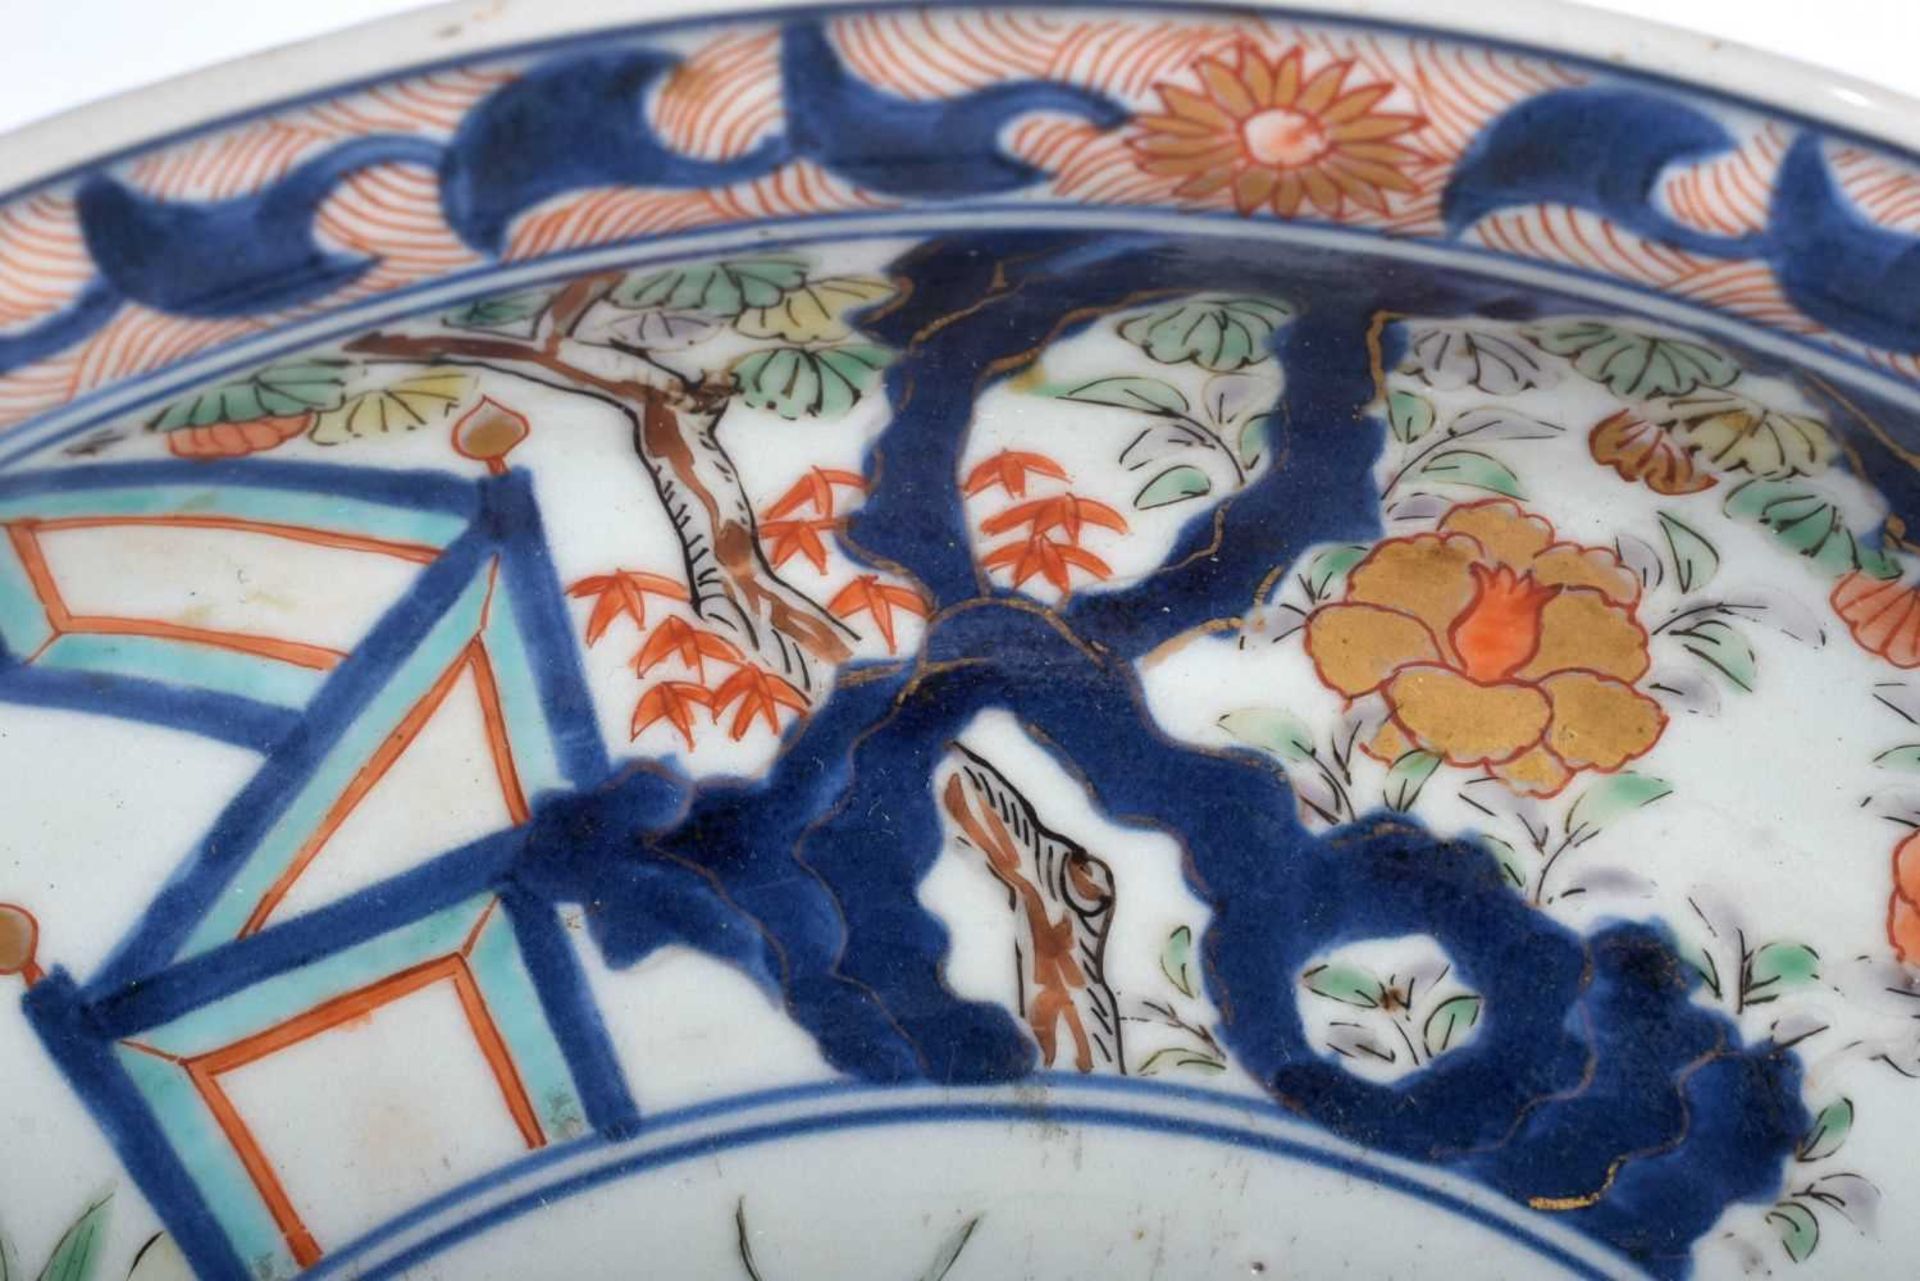 A LARGE PAIR OF 17TH CENTURY JAPANESE GENROKU PERIOD IMARI BOWLS C1688-1703 decorated in vibrant - Image 3 of 10